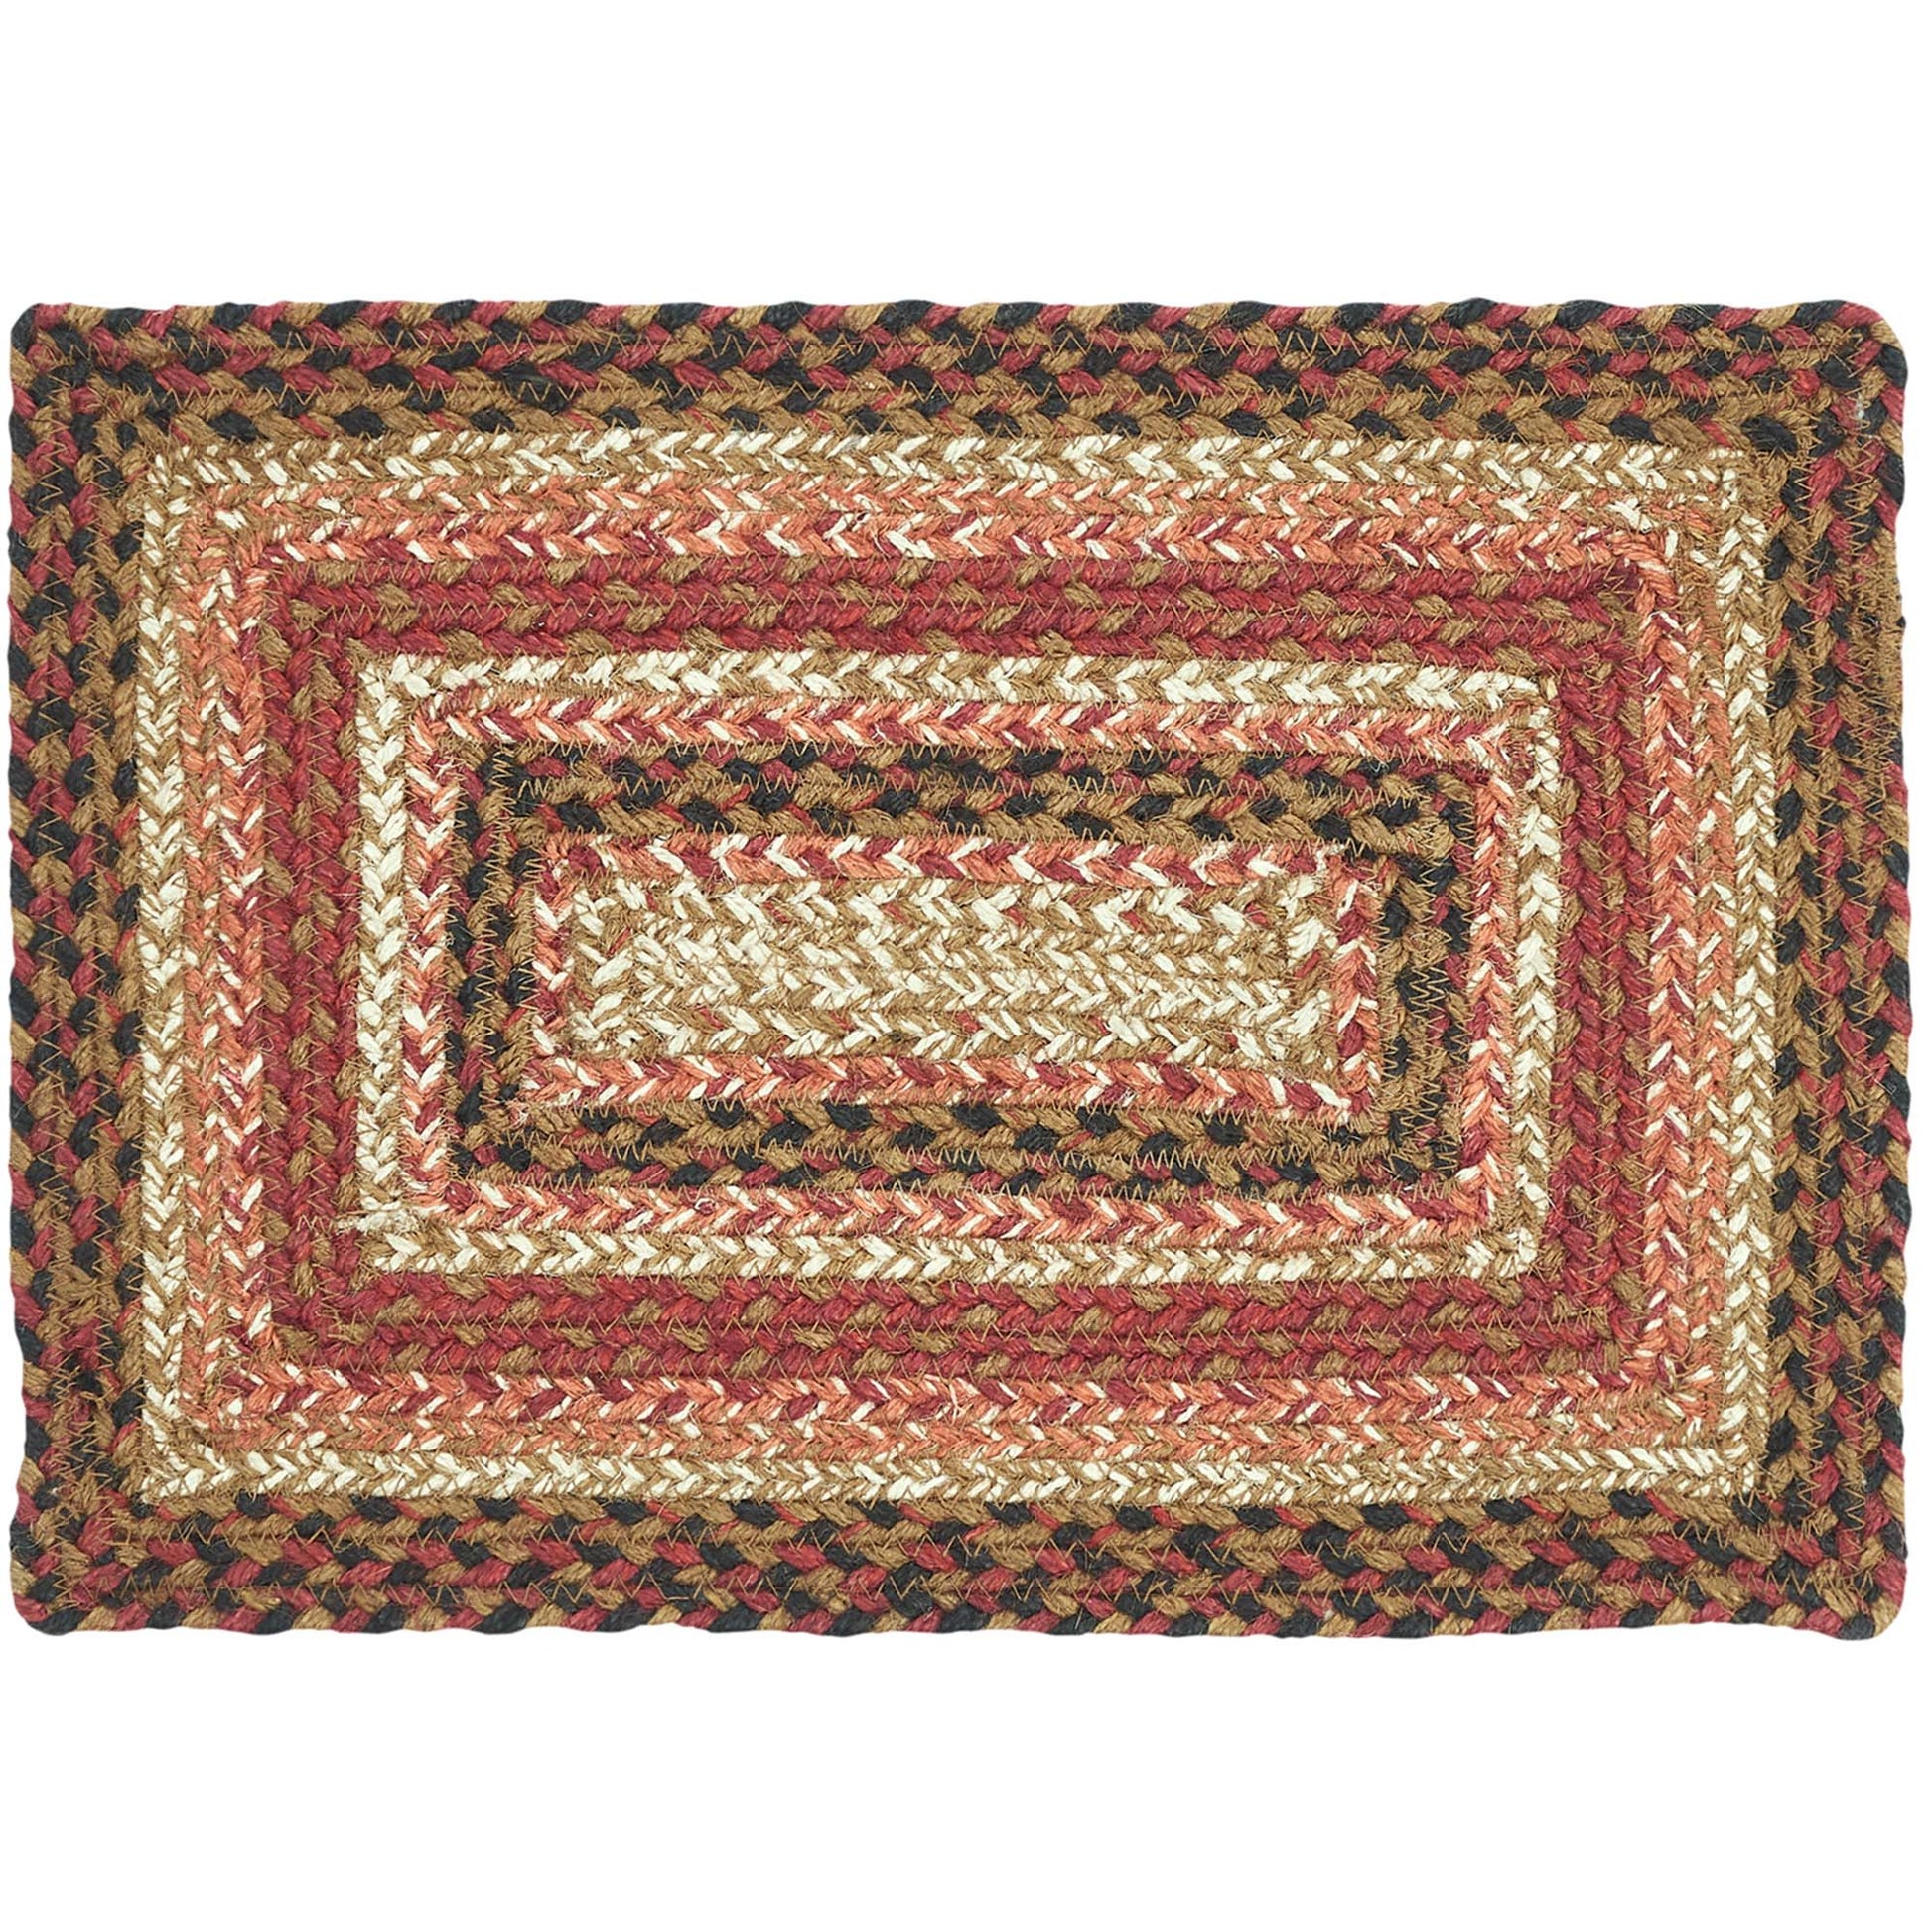 67131-Ginger-Spice-Jute-Rect-Placemat-10x15-image-4